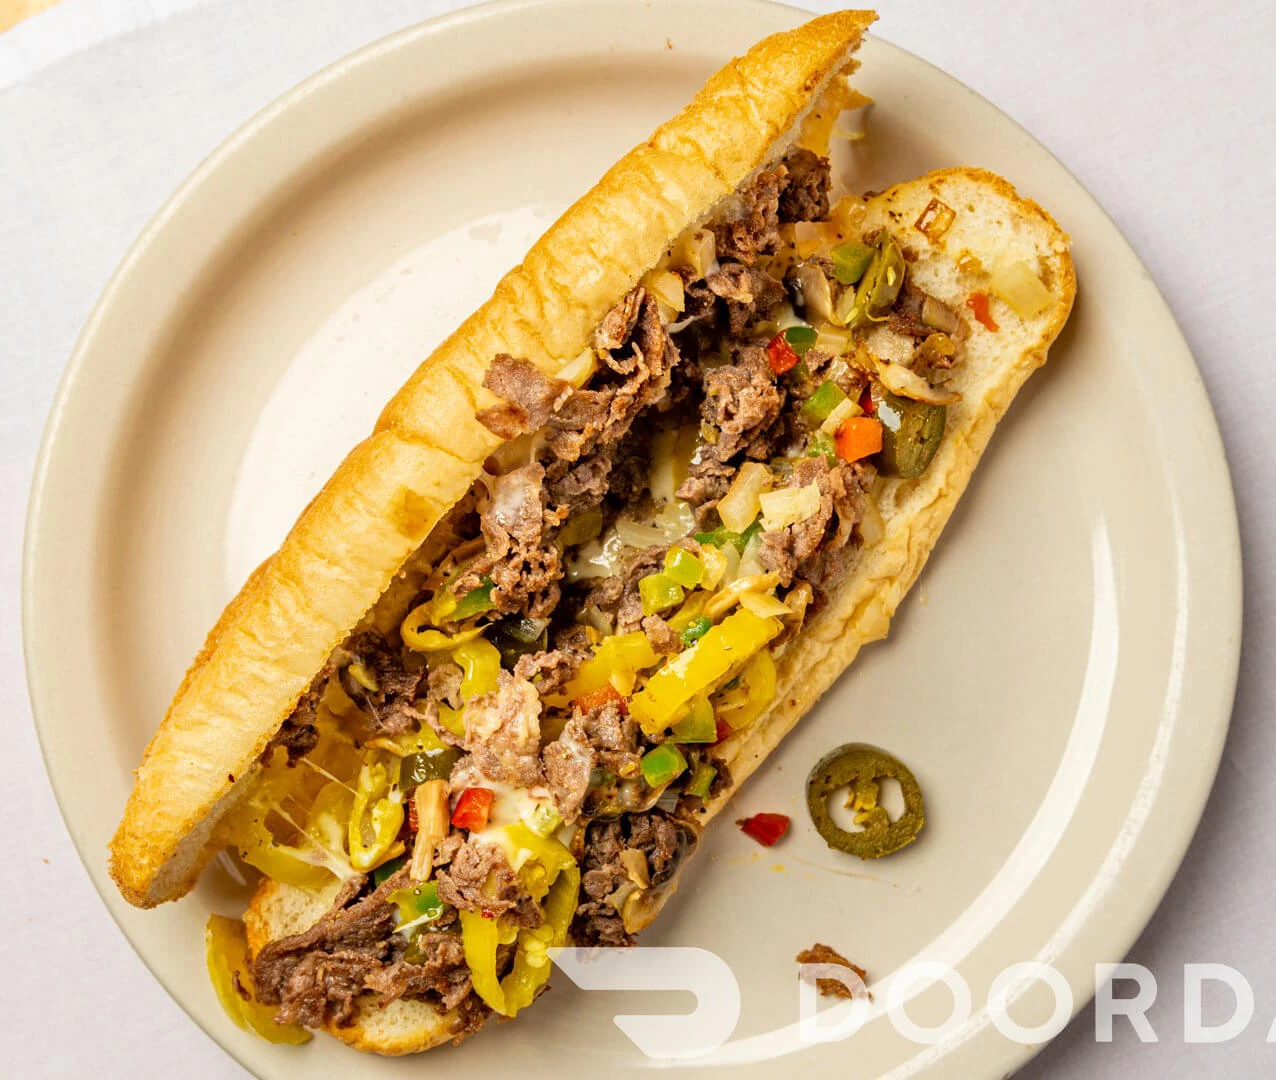 Philly Cheese Steak 9